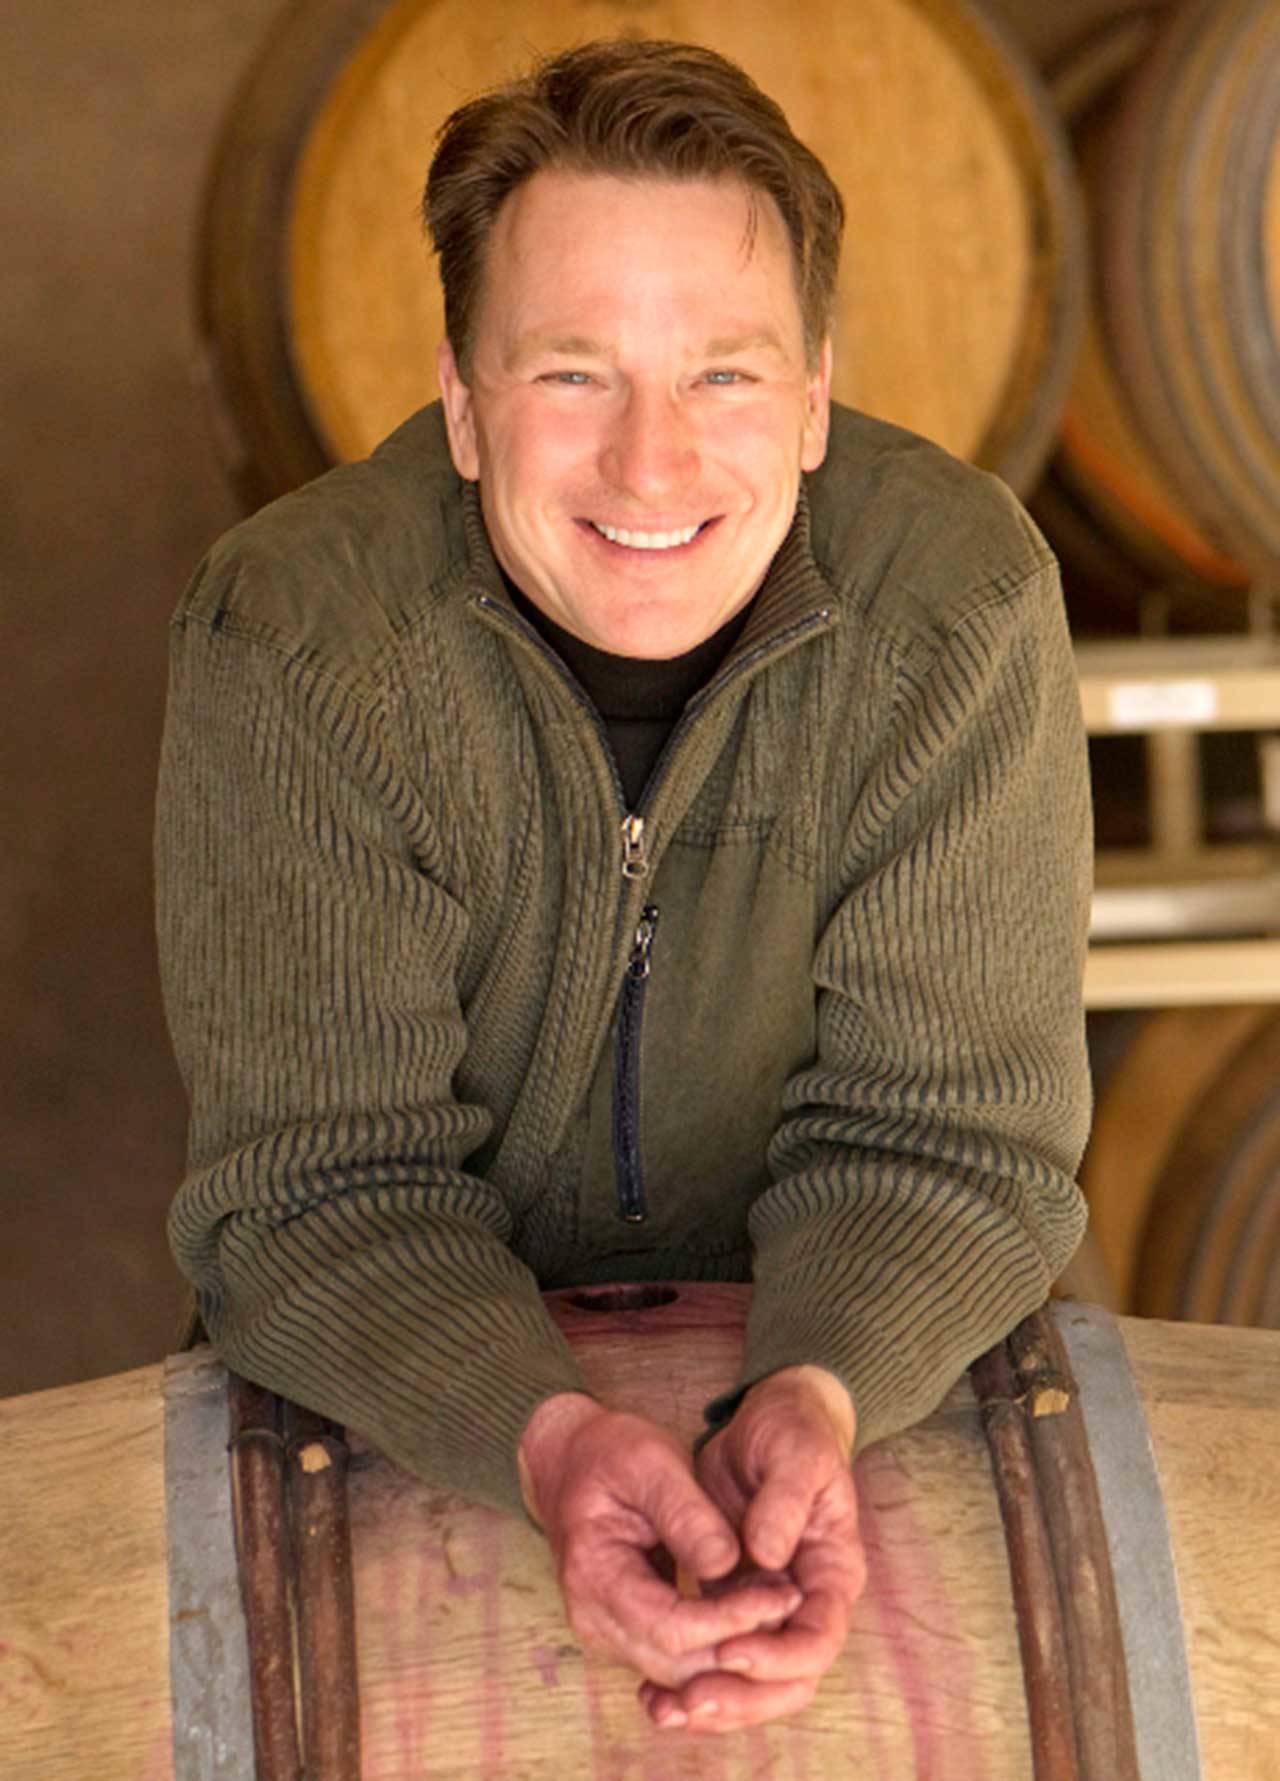 Joe Dobbes, who grew up in Oregon, trained in Germany and France before returning to his home state in 1989 to make wine for producers such as Willamette Valley Vineyards and Hinman Vineyards. He launched Dobbes Family Estate in 2002. (Dobbes Family Estate/Contributed)